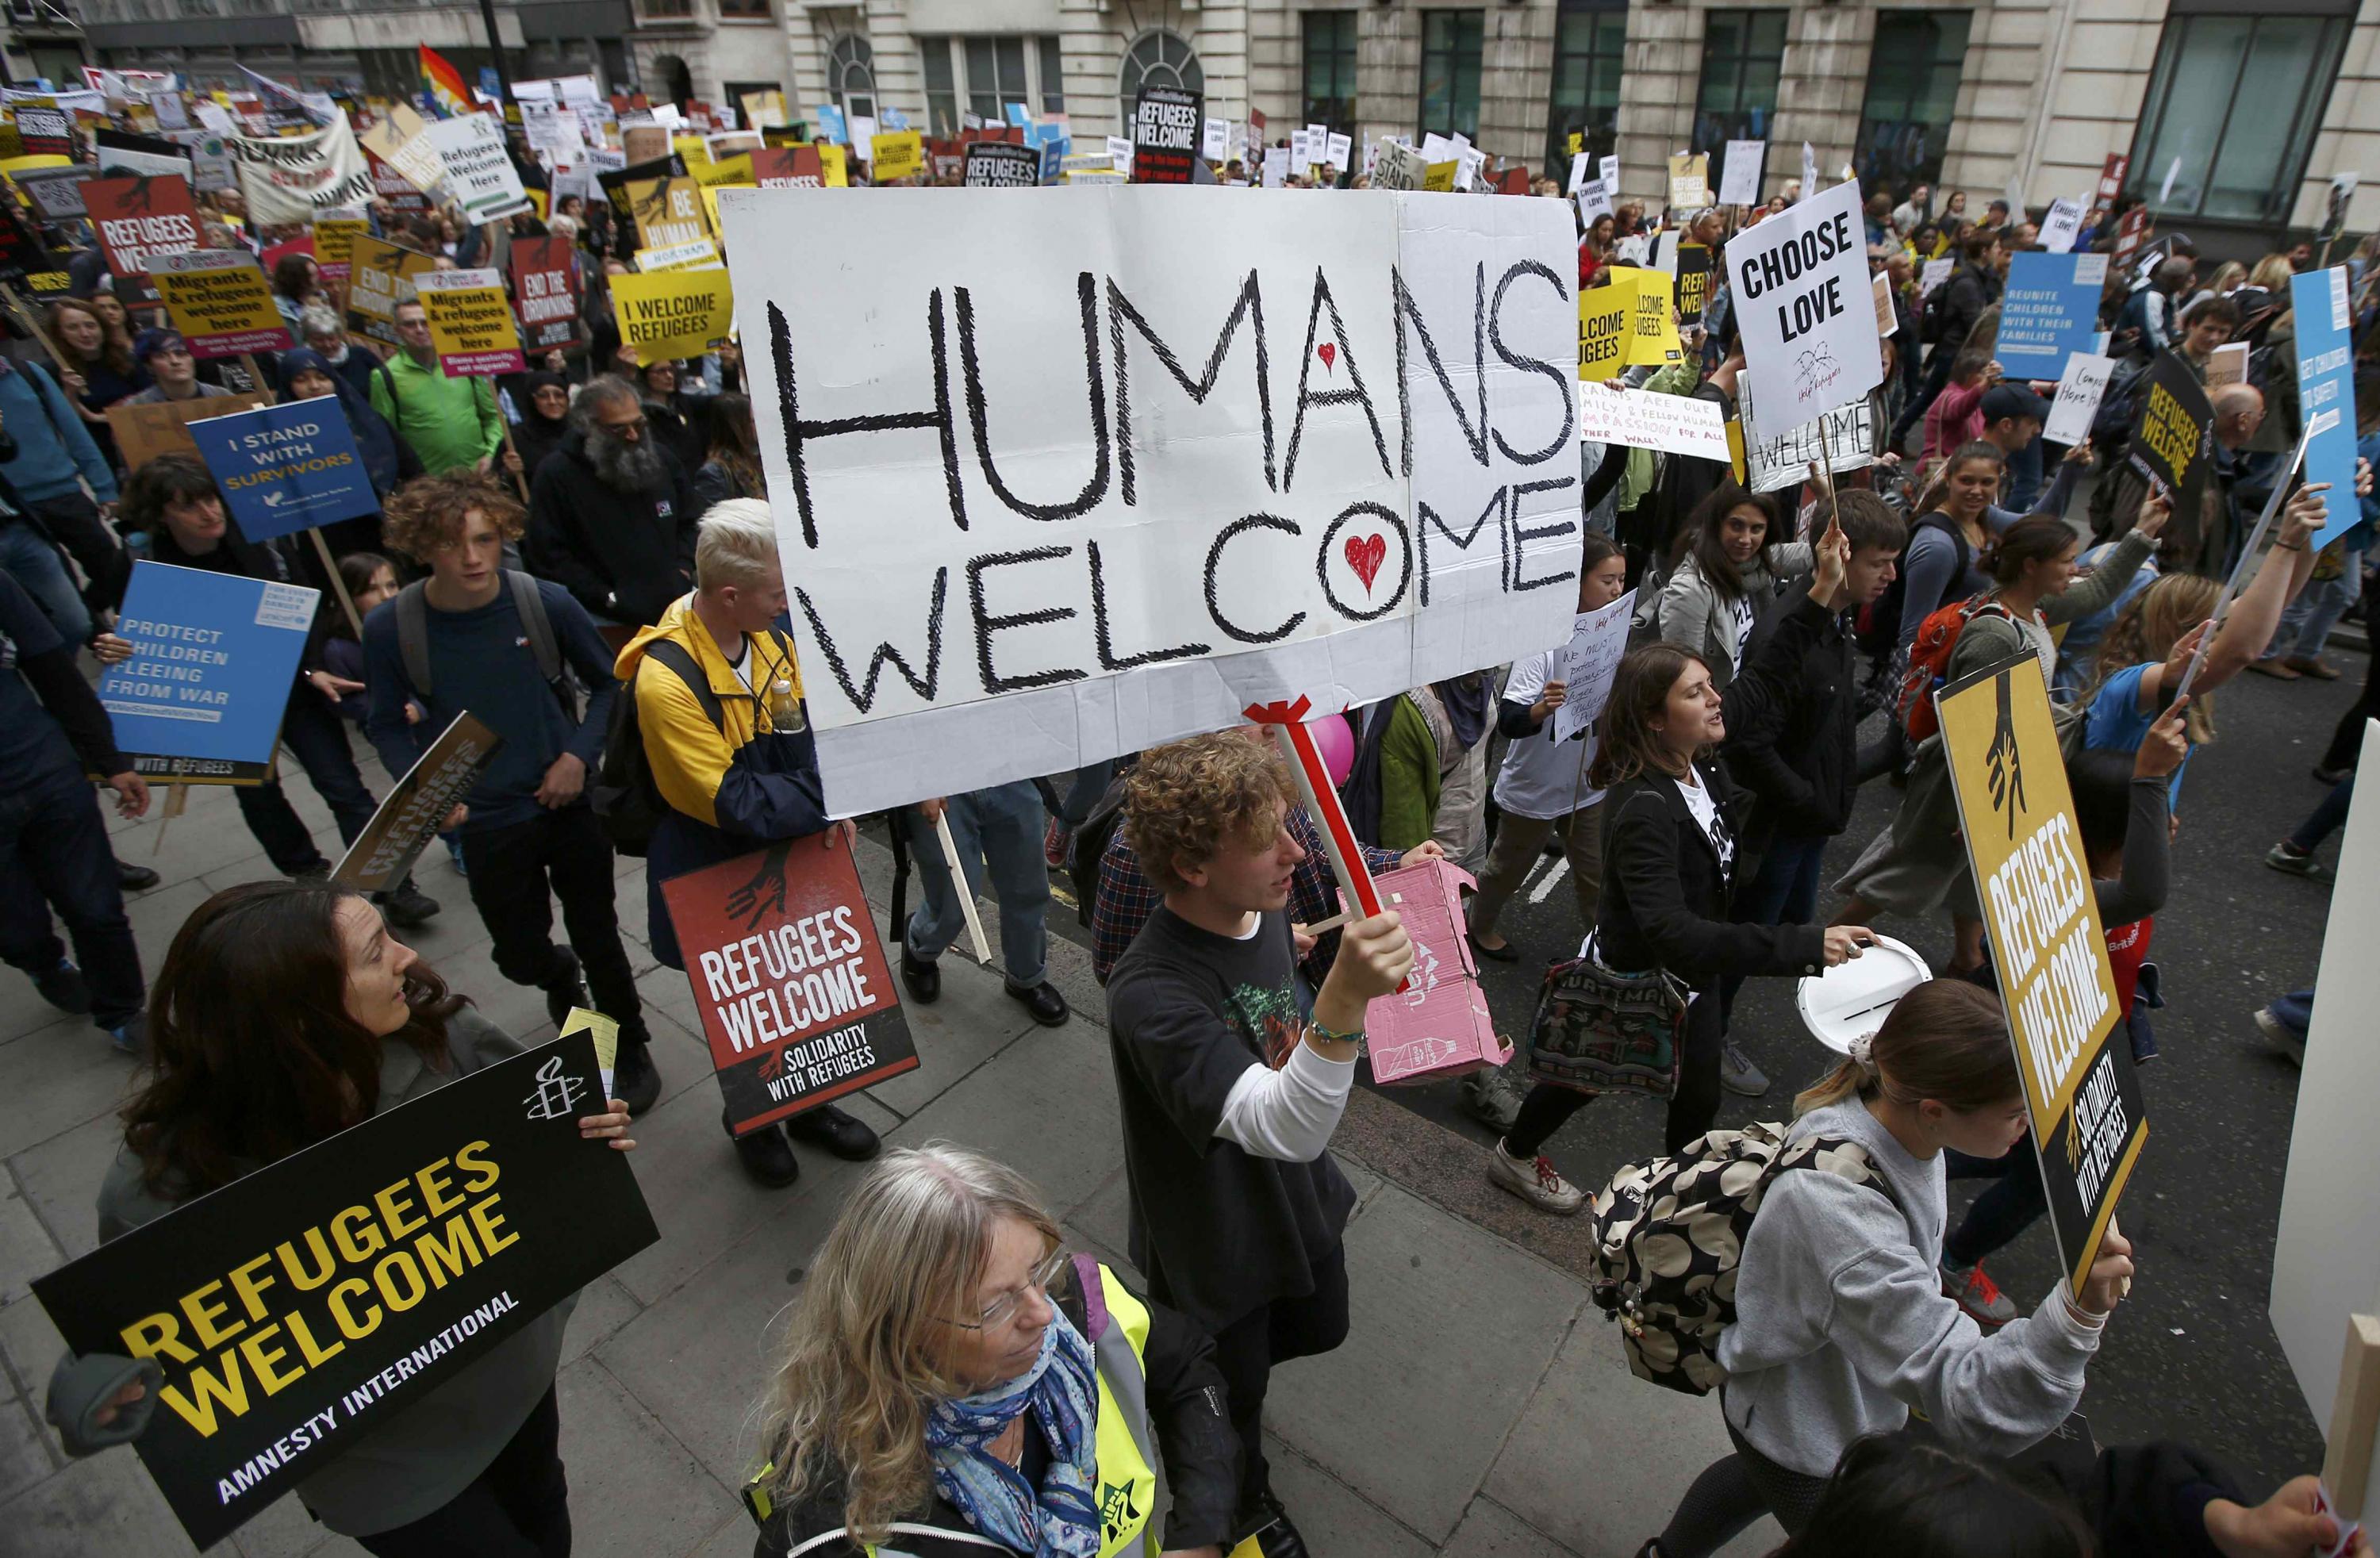 Humans welcome